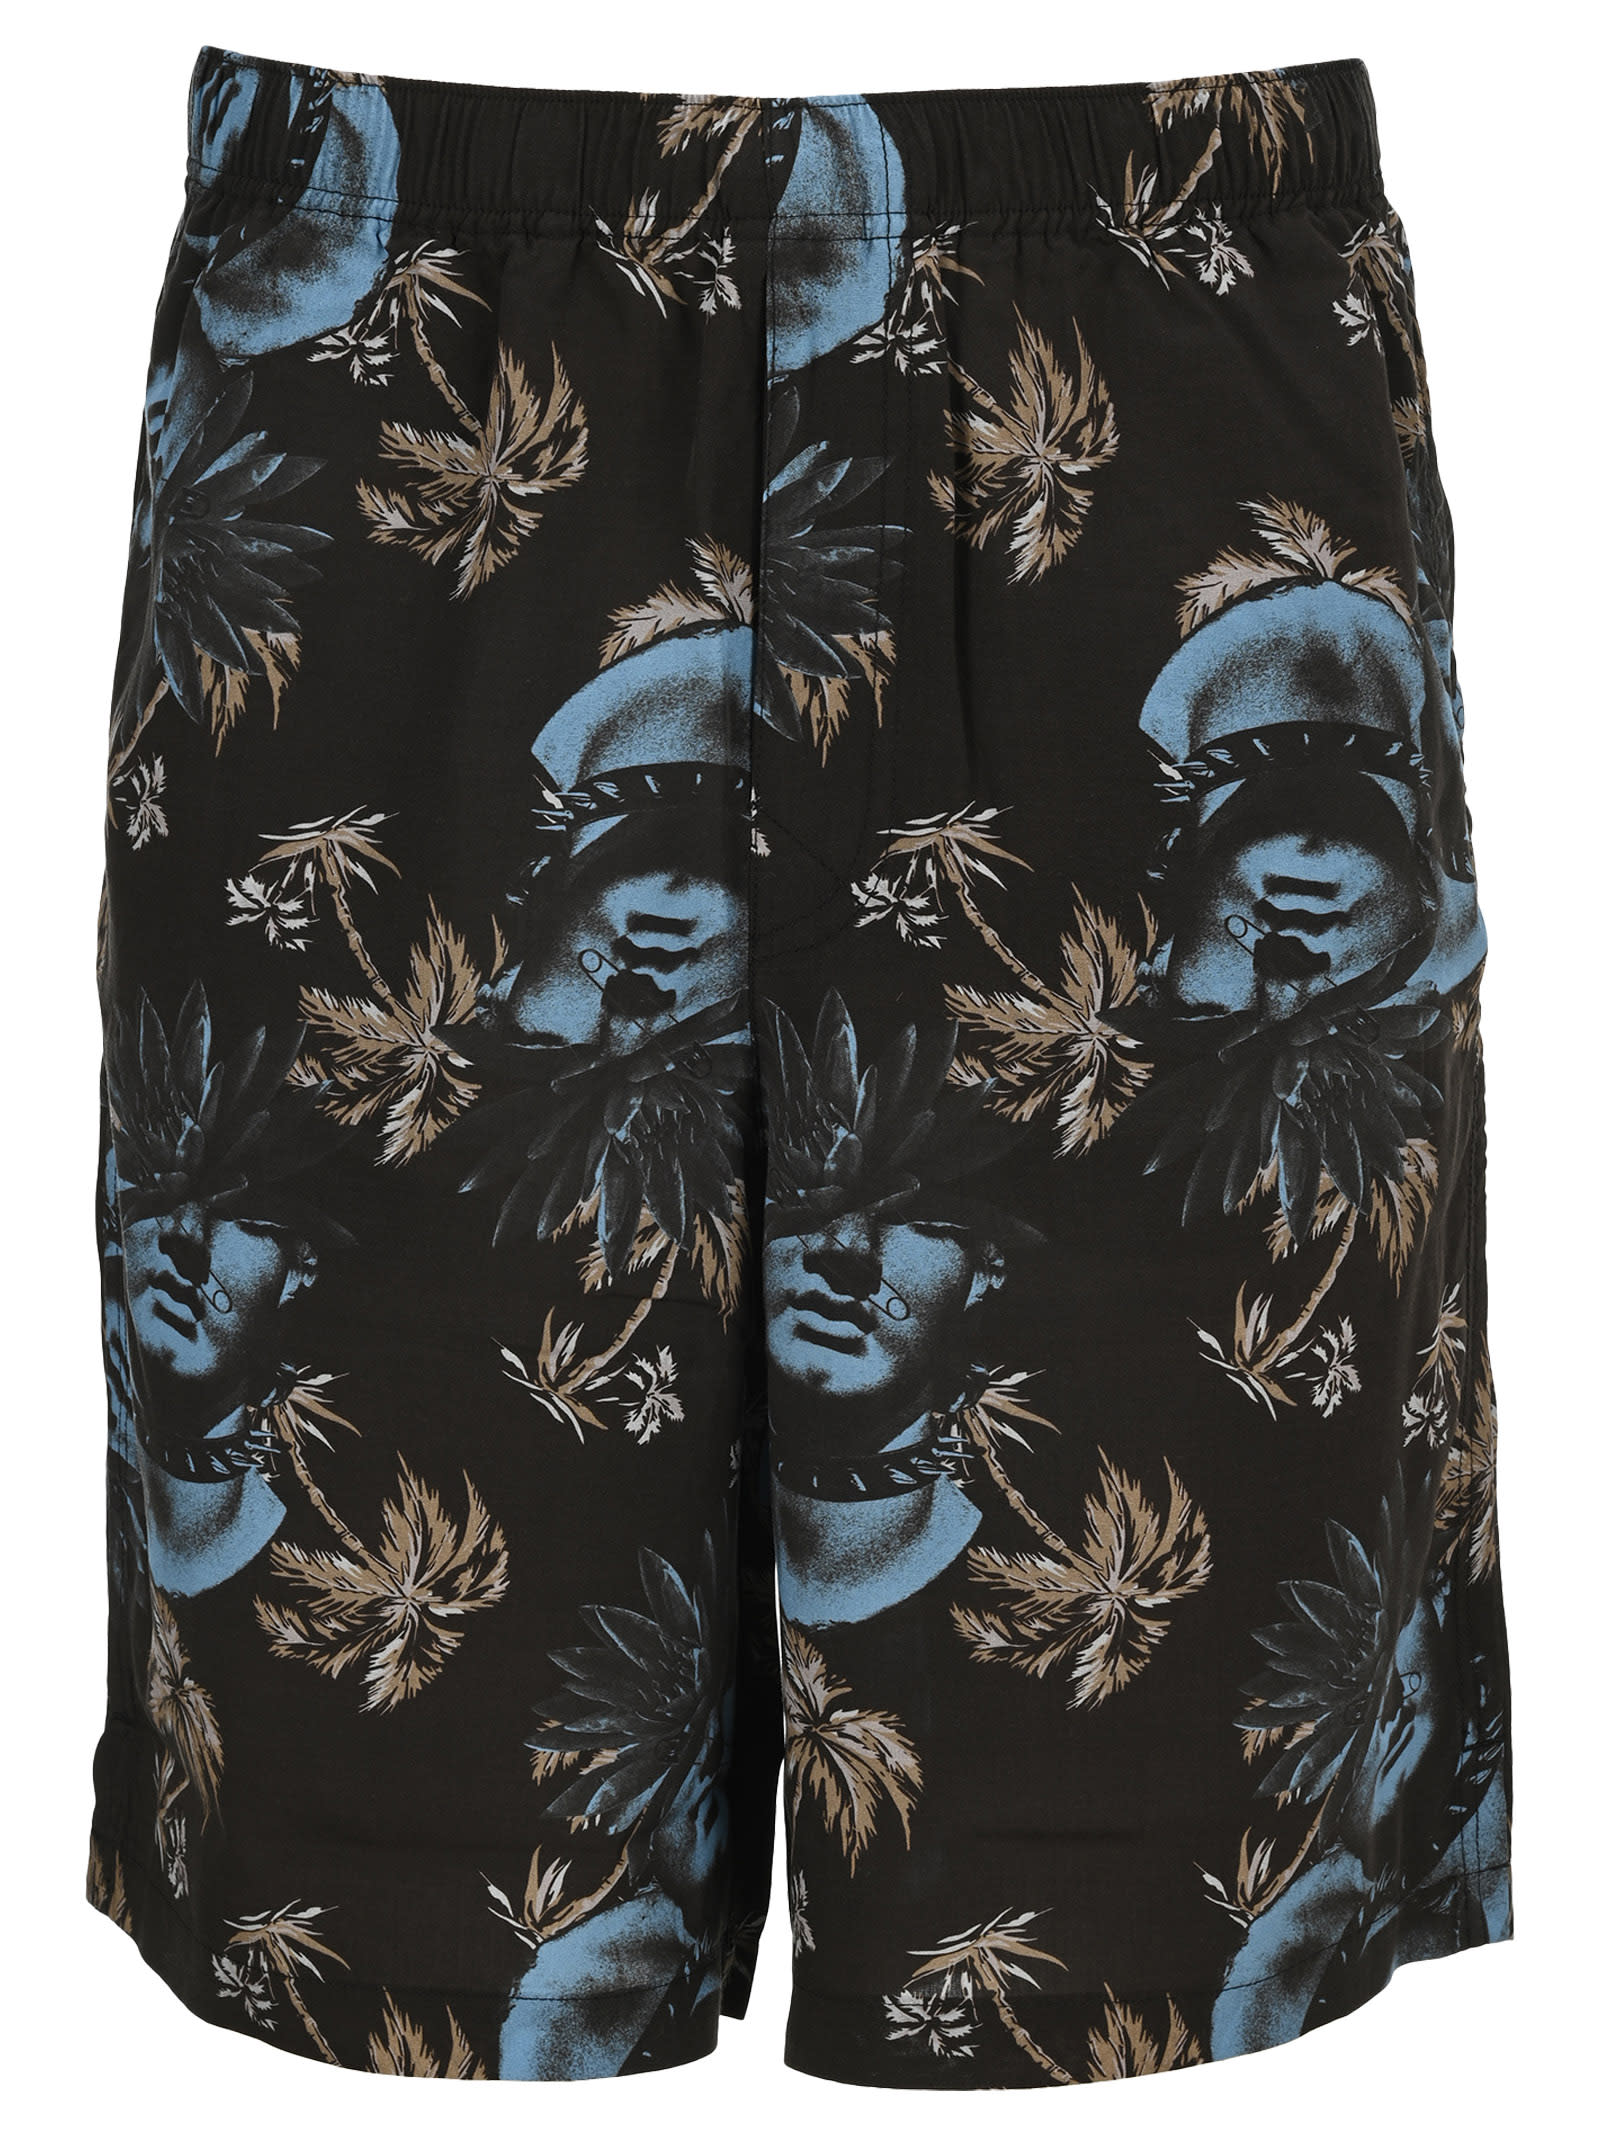 UNDERCOVER UNDERCOVER ROSE-PRINT BERMUDA SHORTS,UC1A4508-1RAYONBLACK